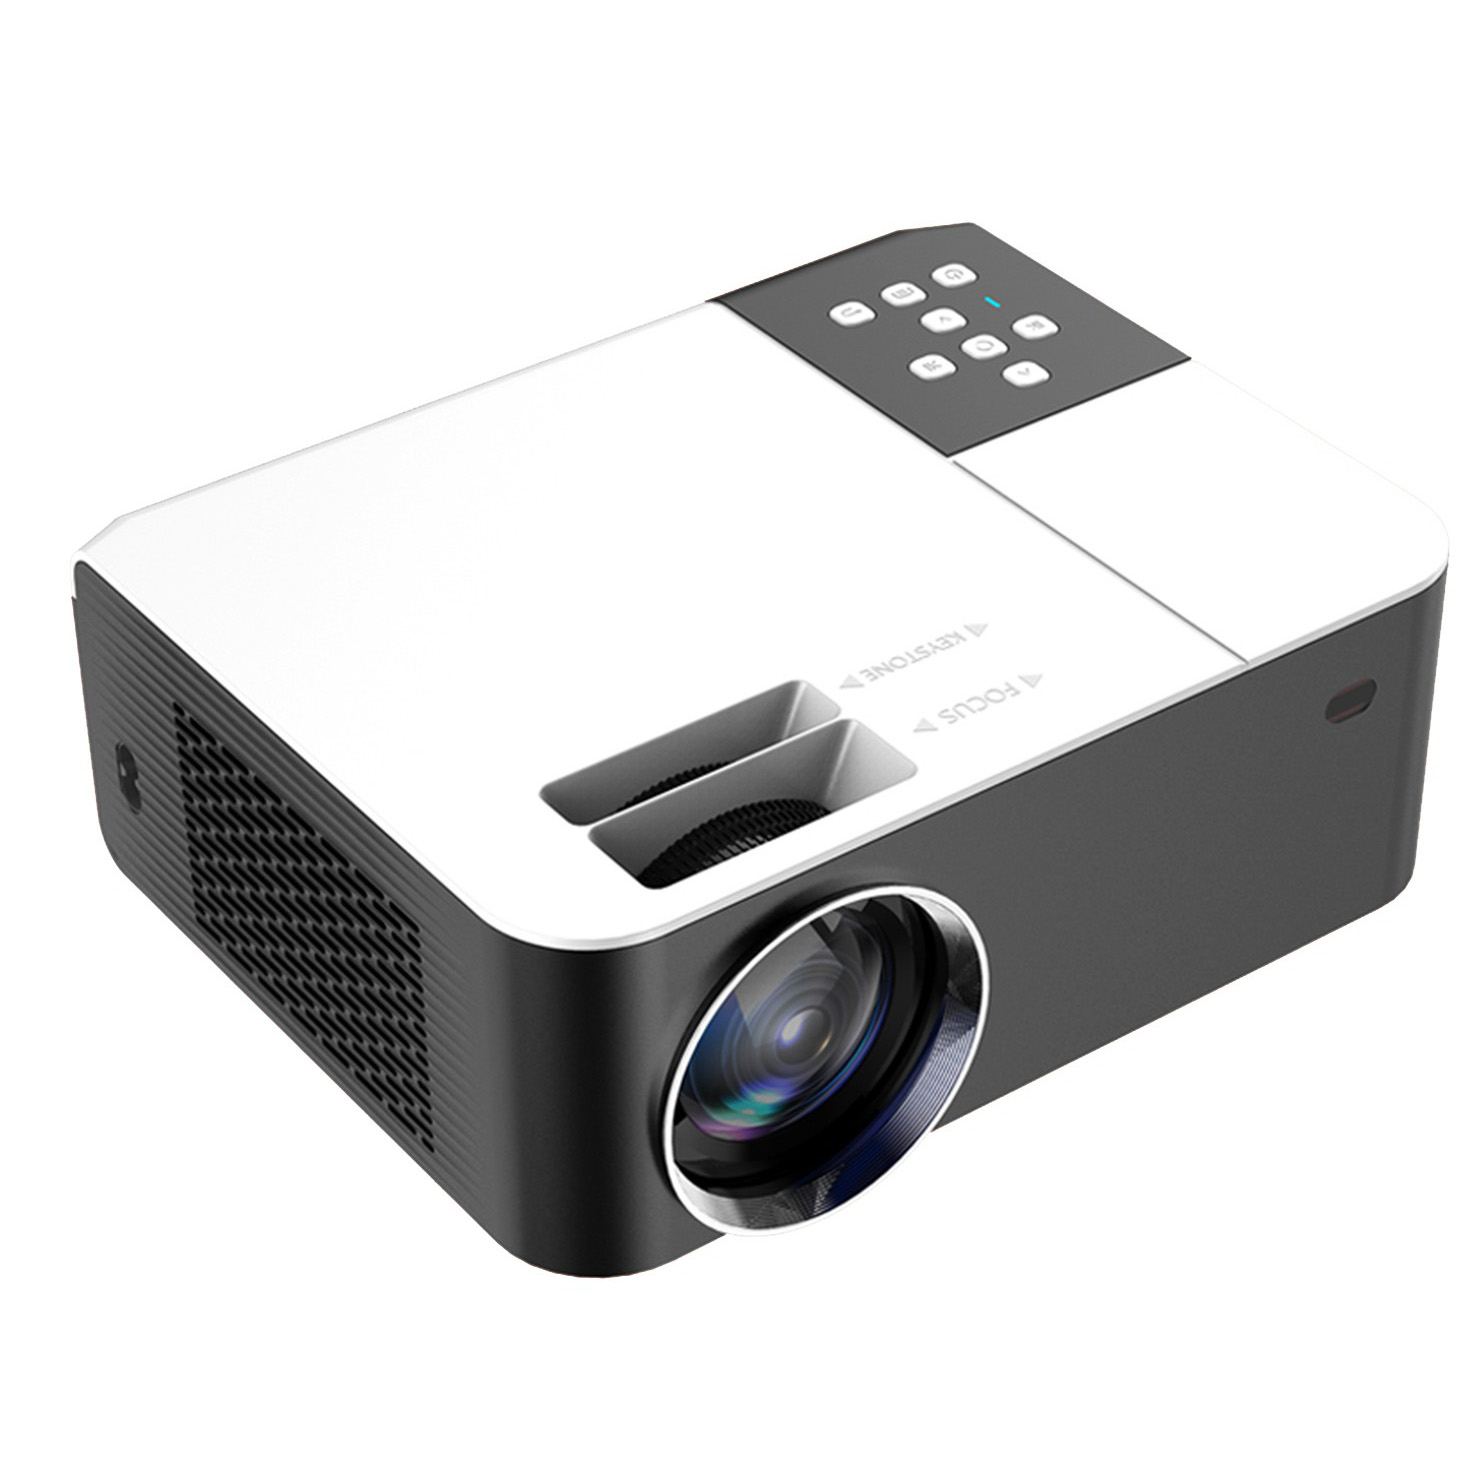 UX-C12 educational high brightness 1080p home theater projector